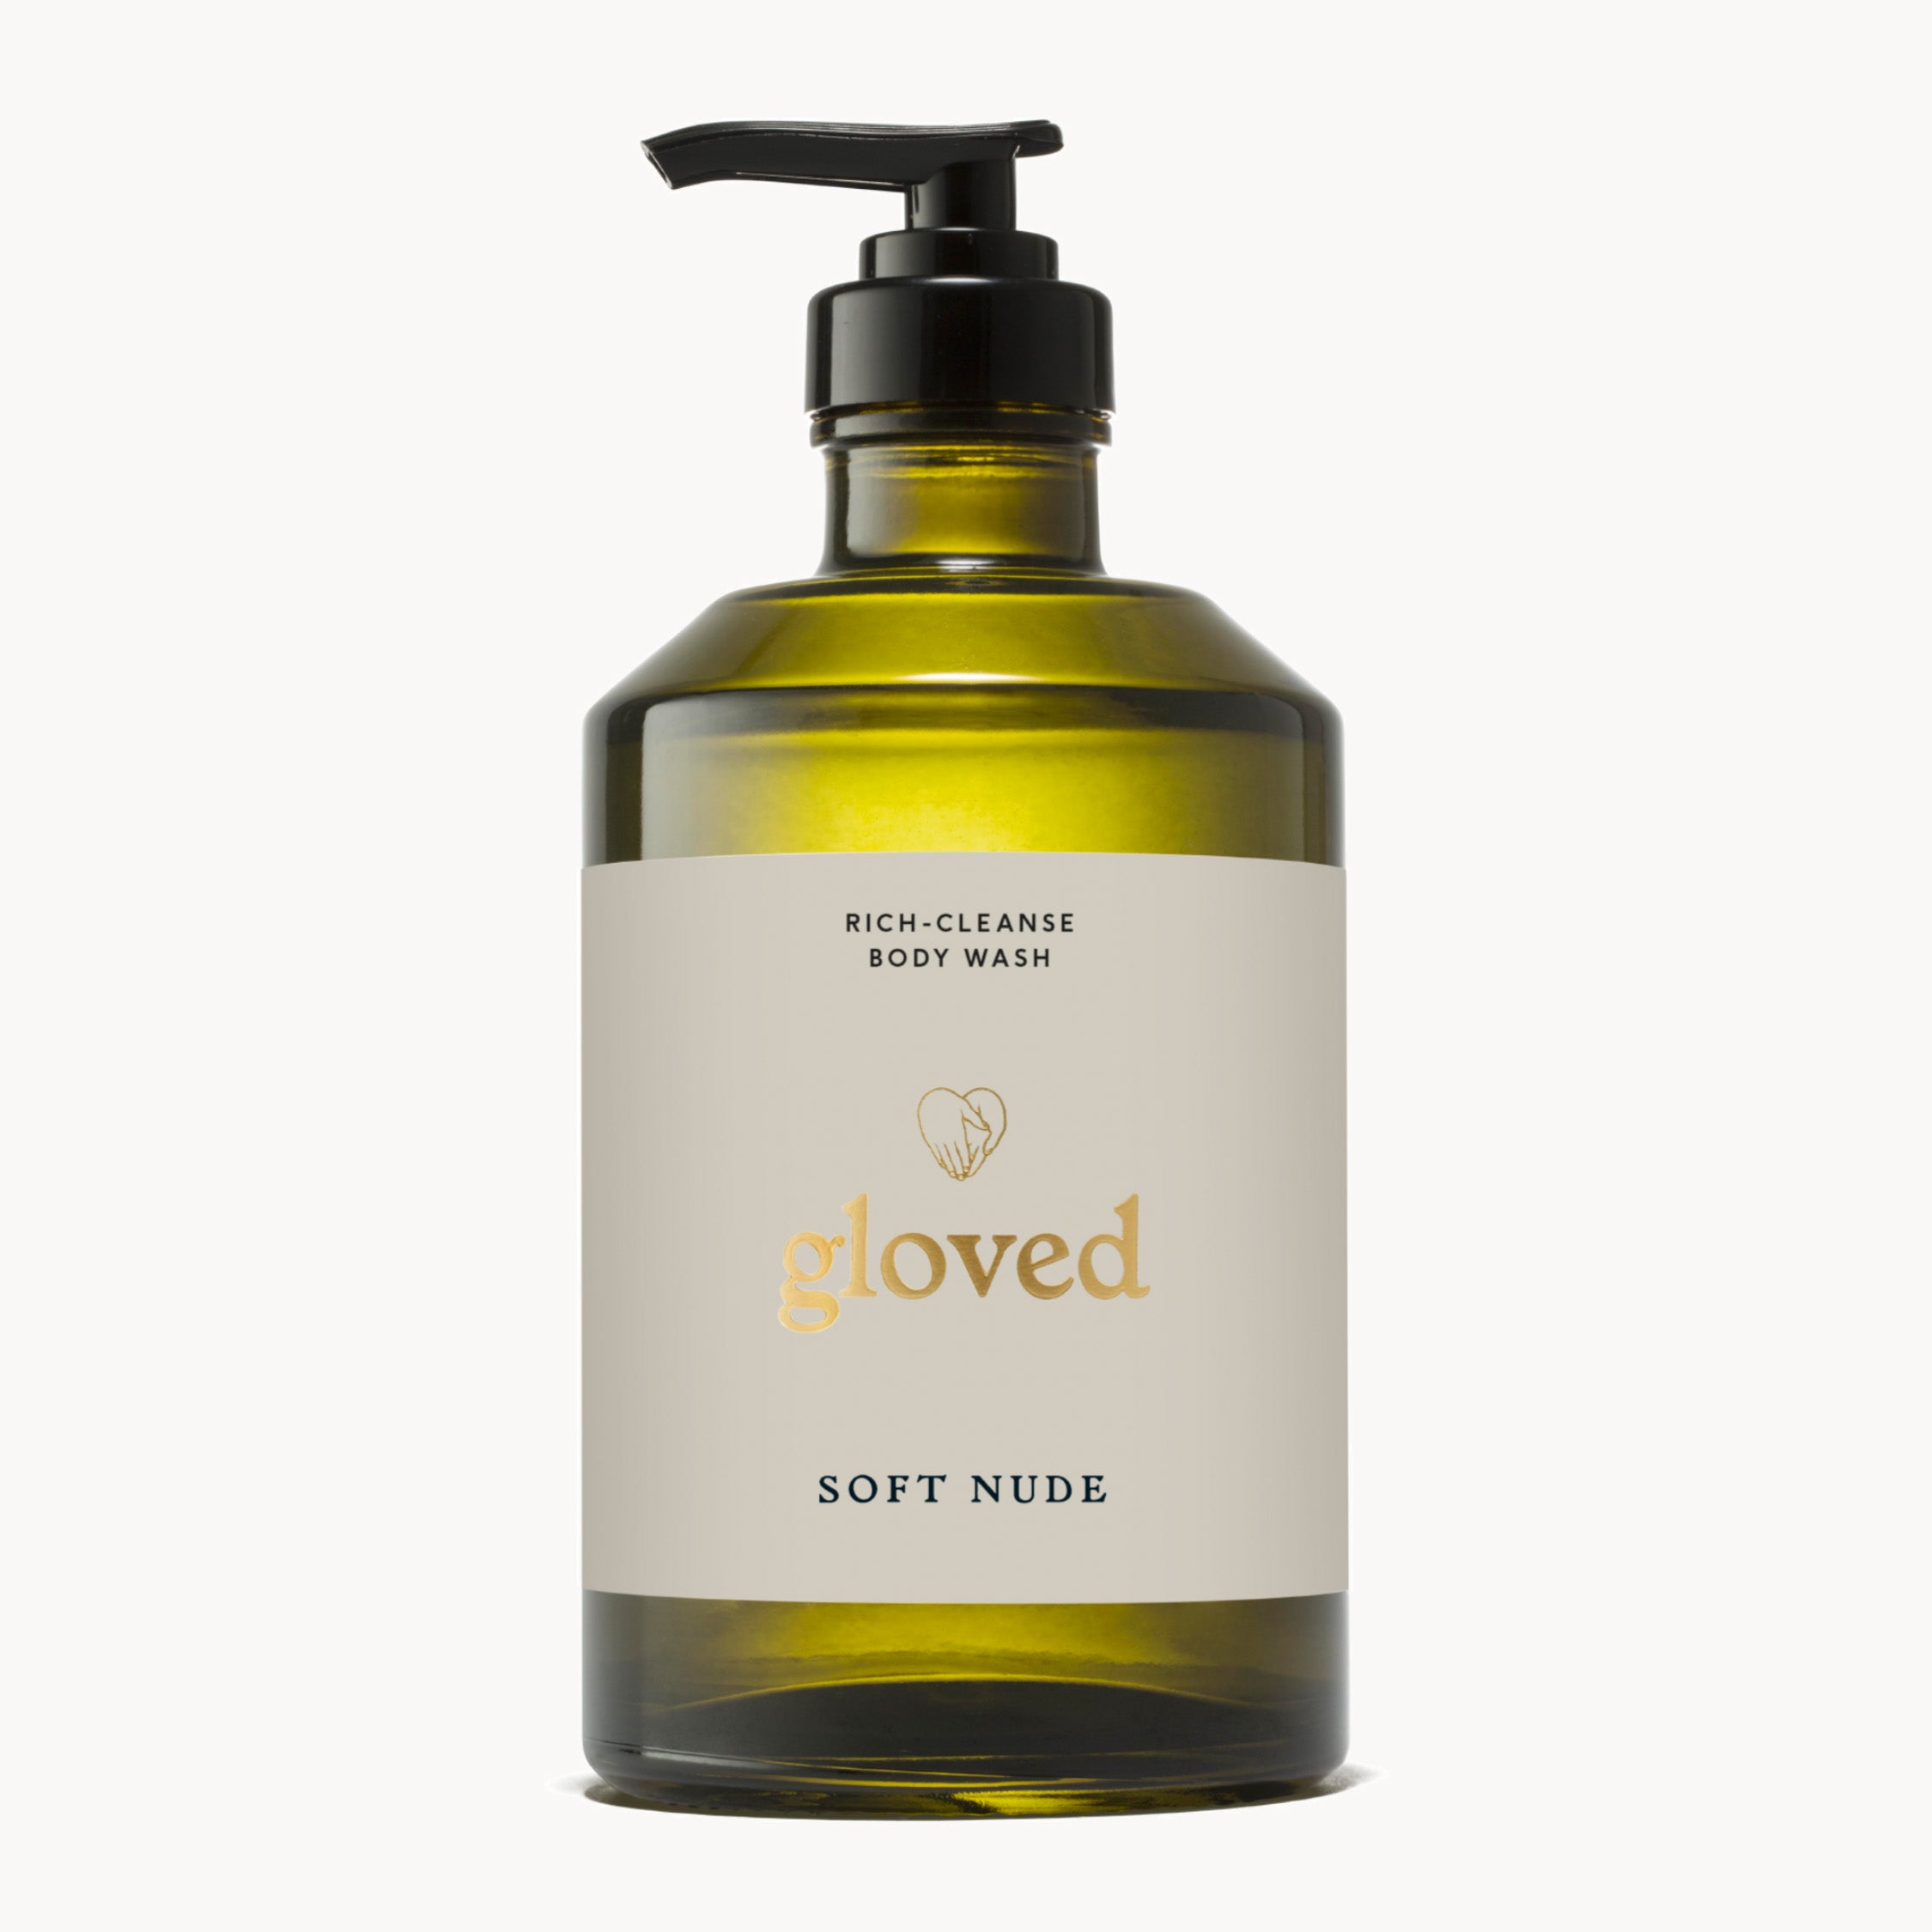 Soft Nude Rich-Cleanse Body Wash